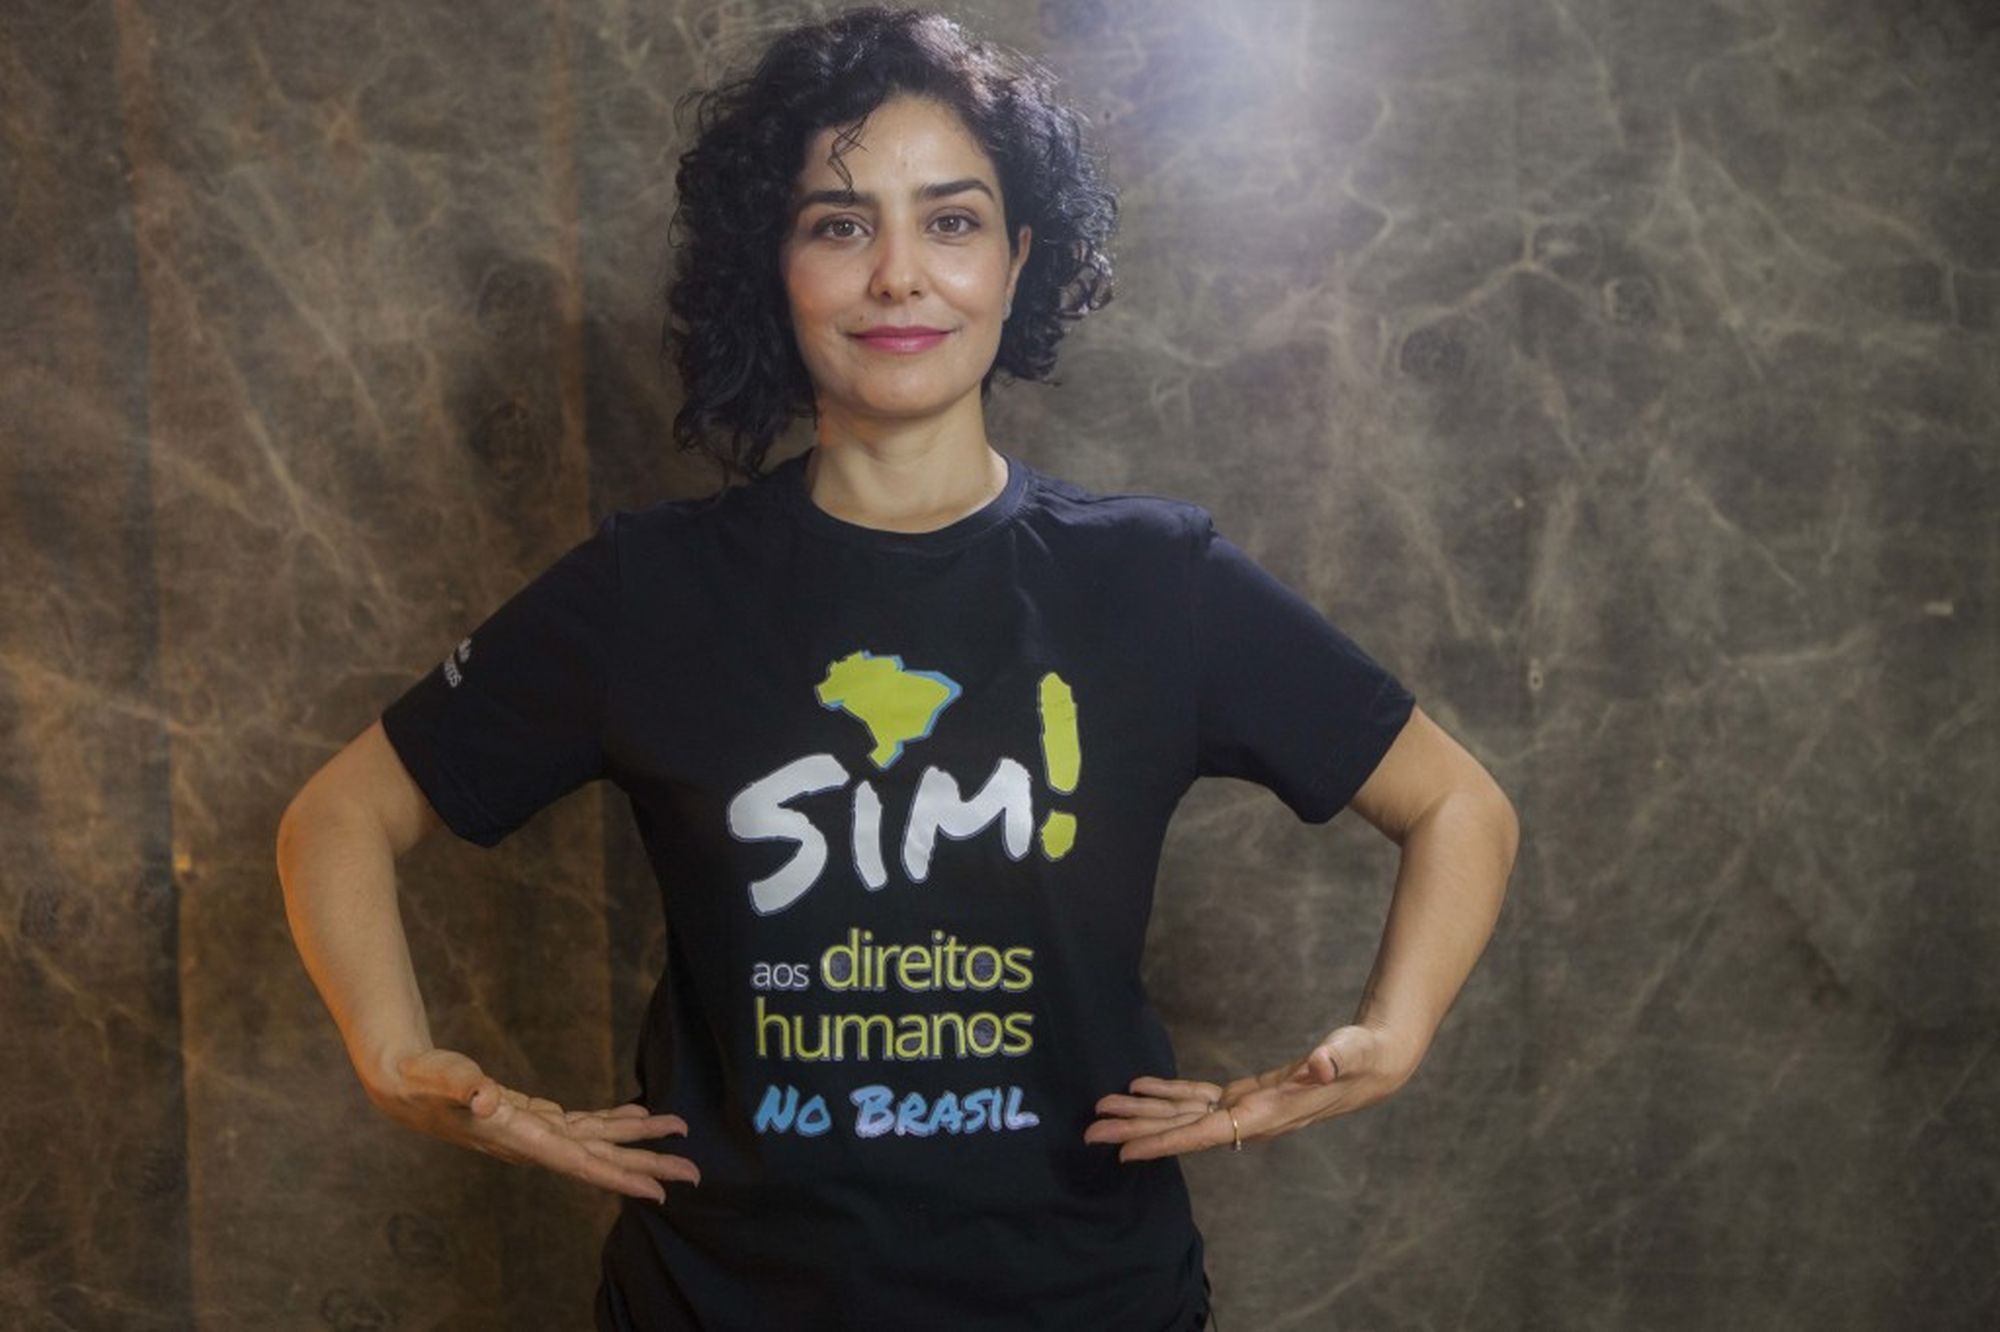 Message on the T-shirt: YES to Human Rights in Brazil